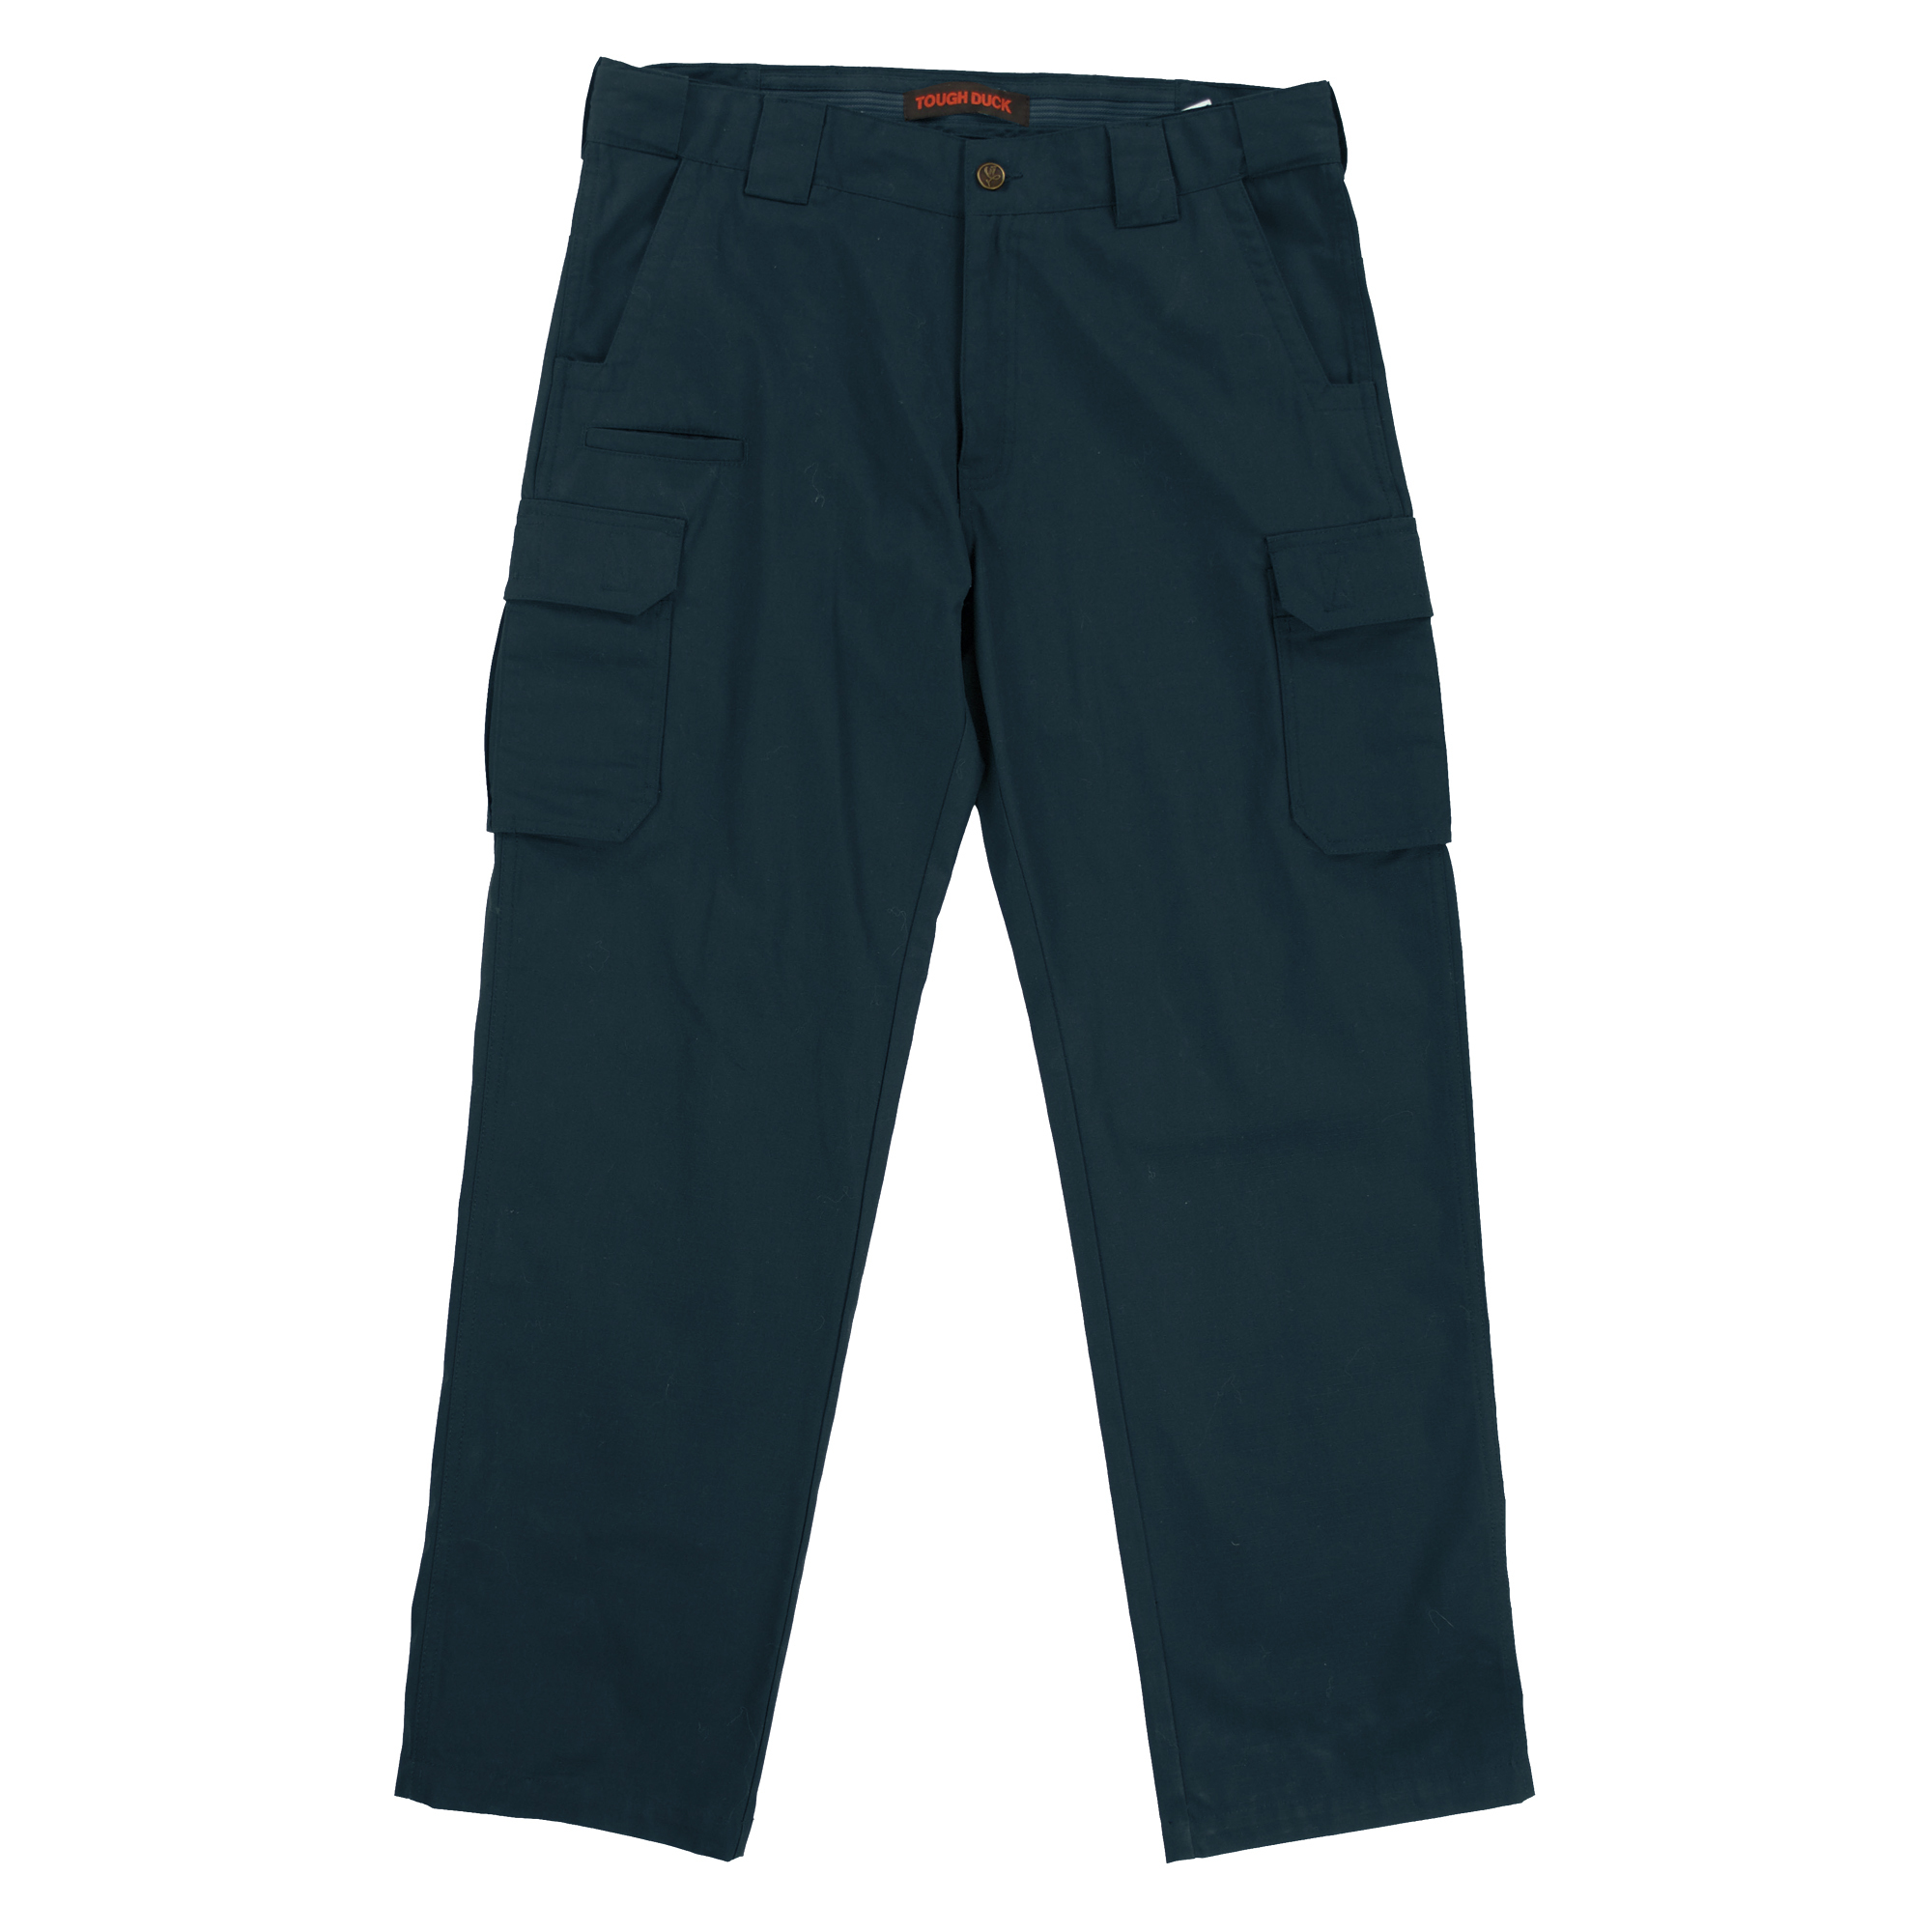 Tough Duck, Ripstop Cargo Pant, Waist 42 in, Inseam 32 in, Color Navy, Model WP111